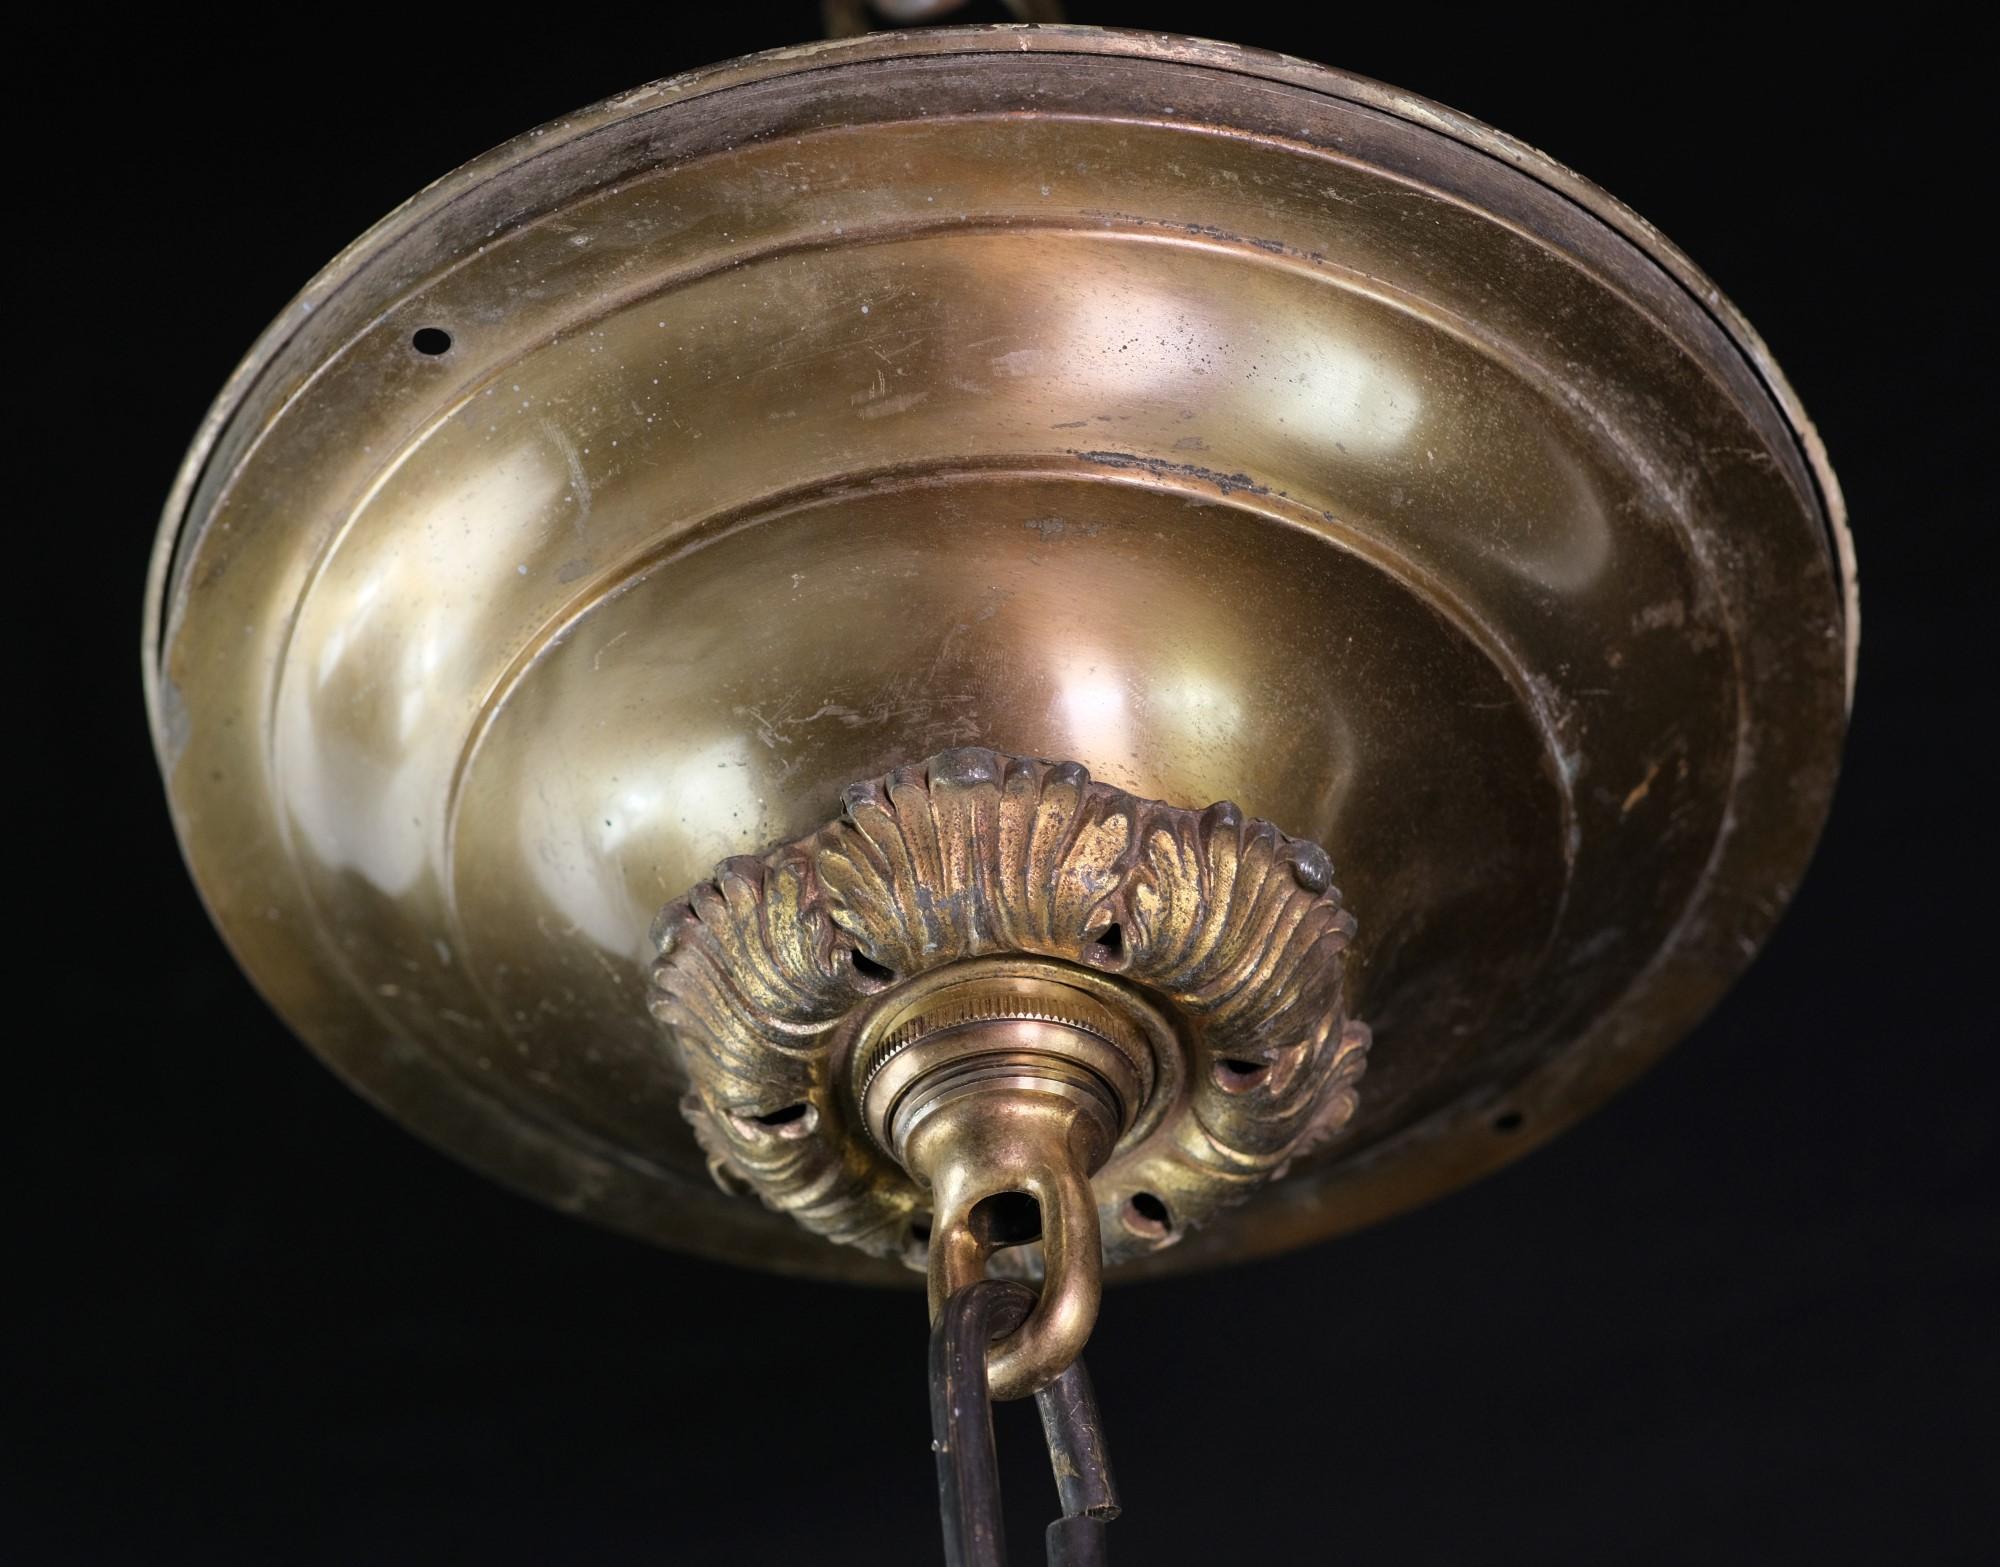 Ornate aged bronze fitter, a matching steel chain and a brass mount make up the hardware part of this pendant light. Comes with the original spherical frosted glass shade. Small quantity available at time of posting. Priced each. Please inquire.